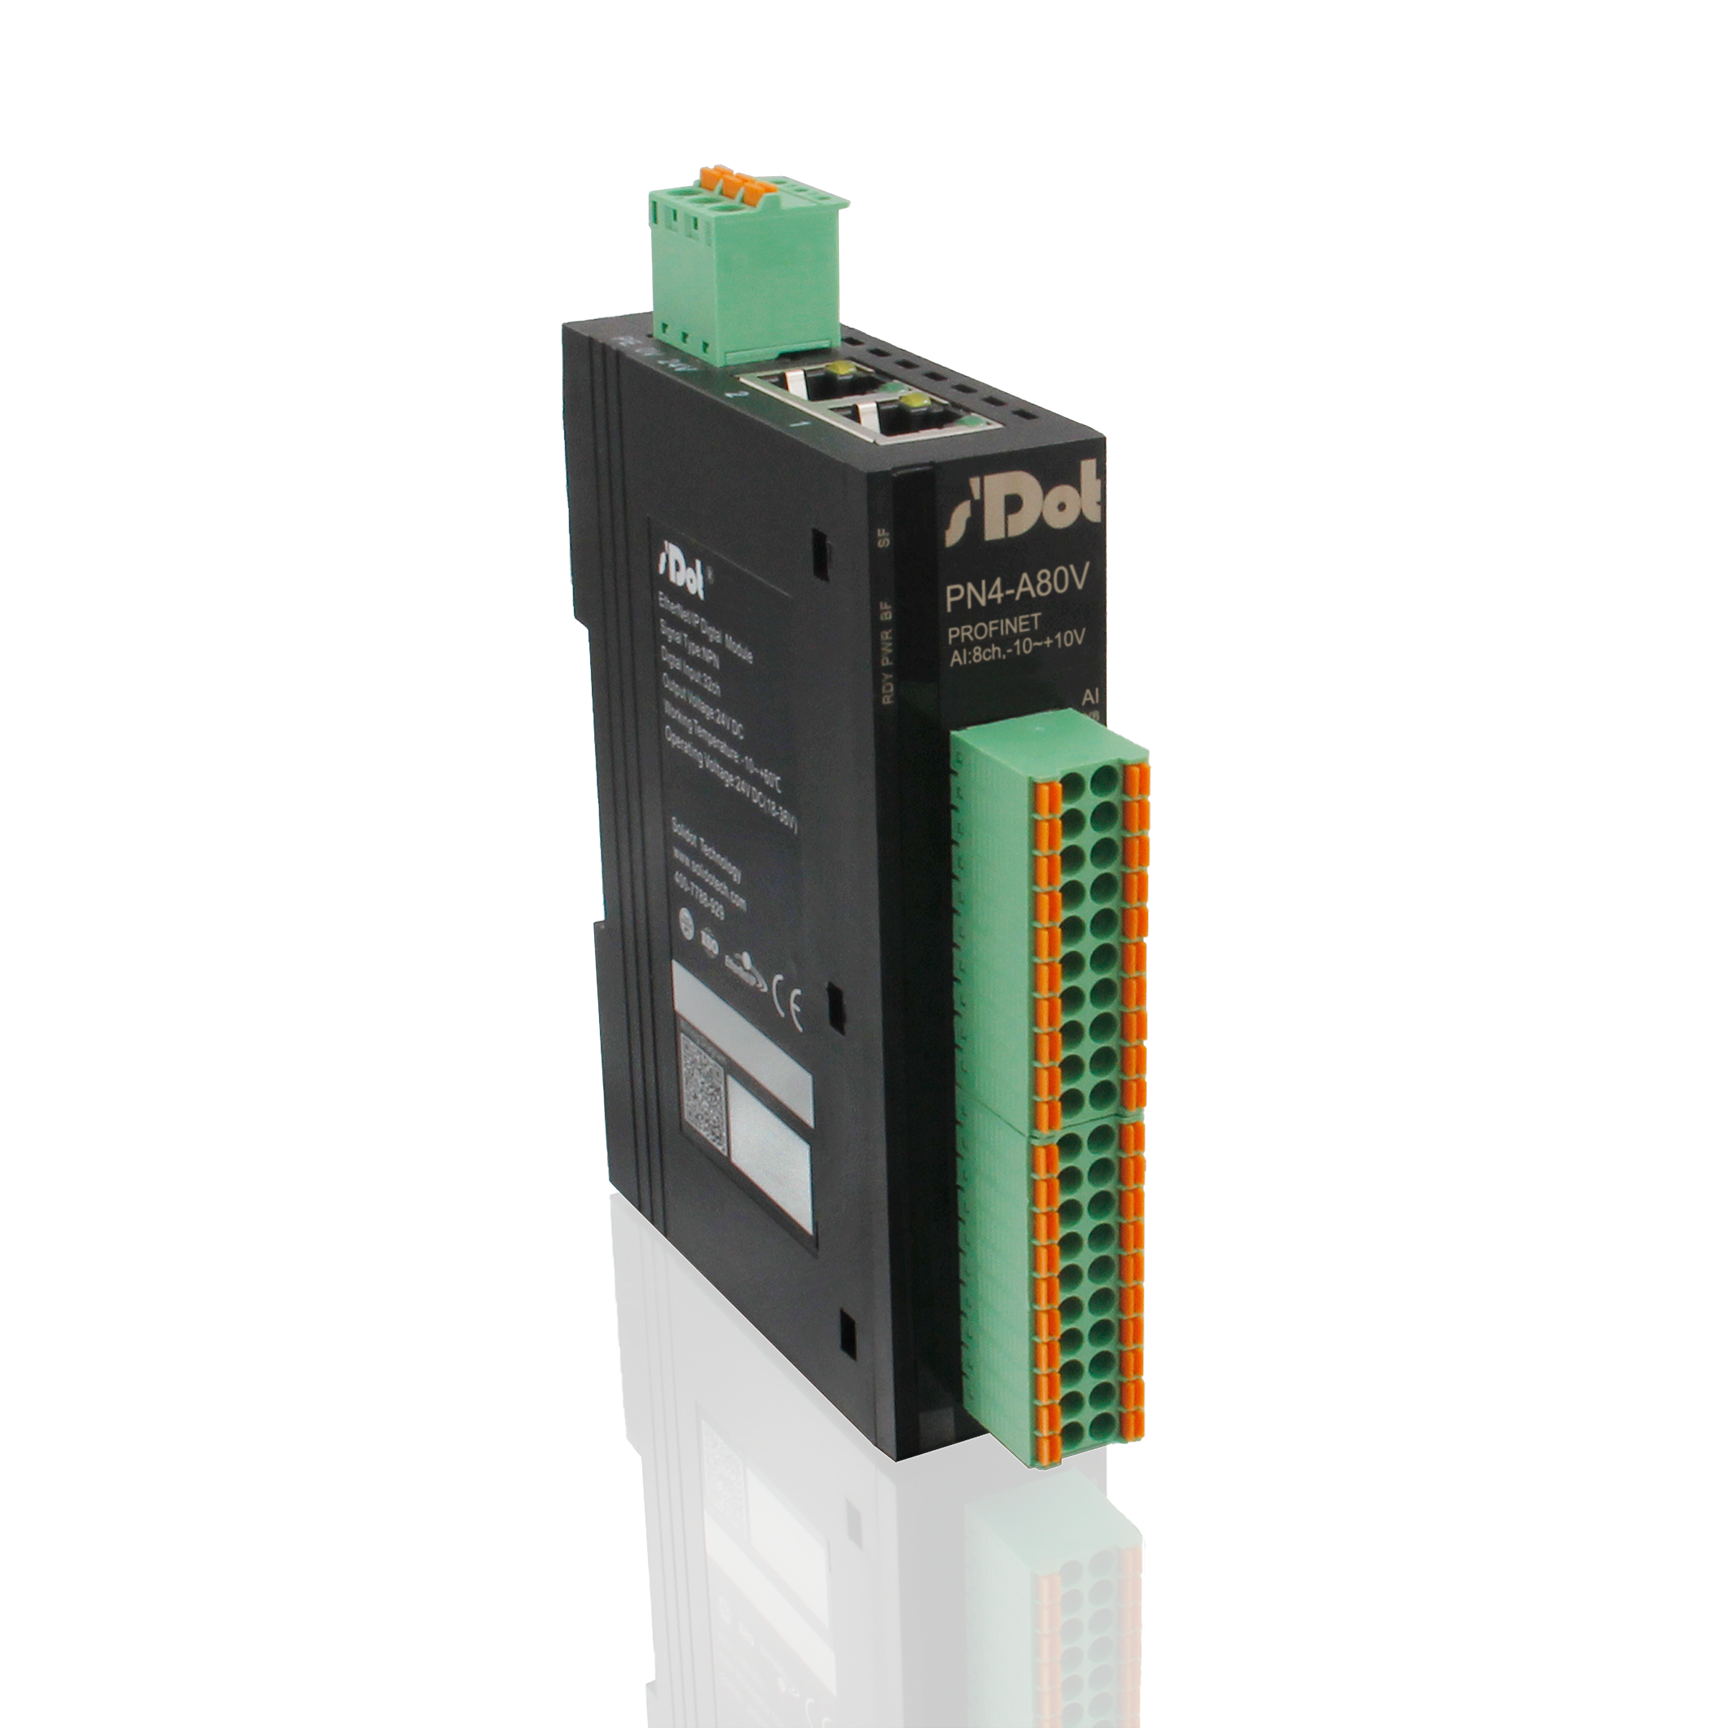 Solidot Profinet remote I/O module PN4 with 8 analog channels